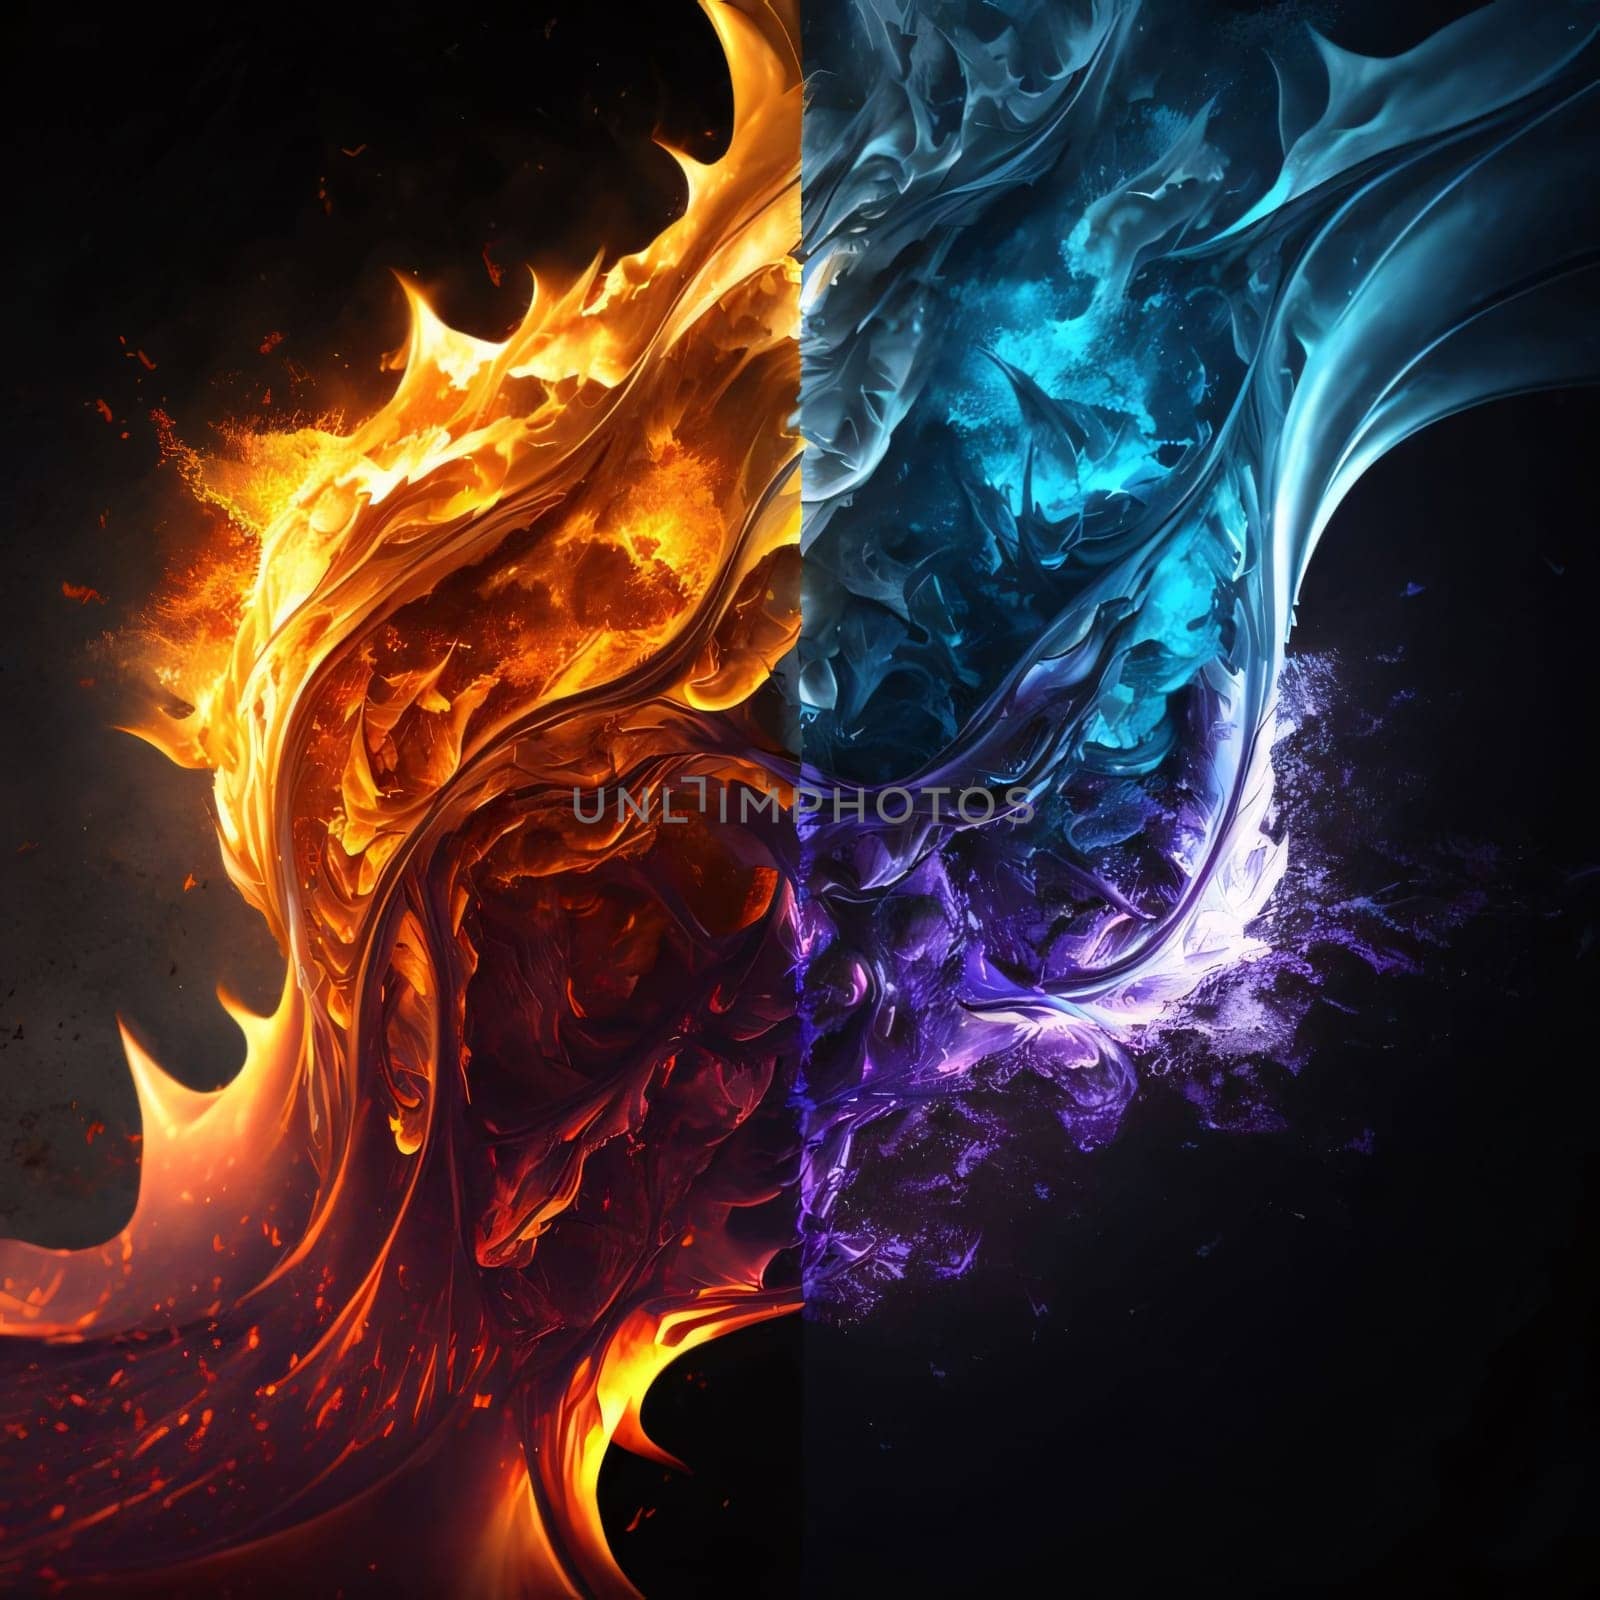 Abstract background design: abstract fire flames on black and blue background, computer generated images